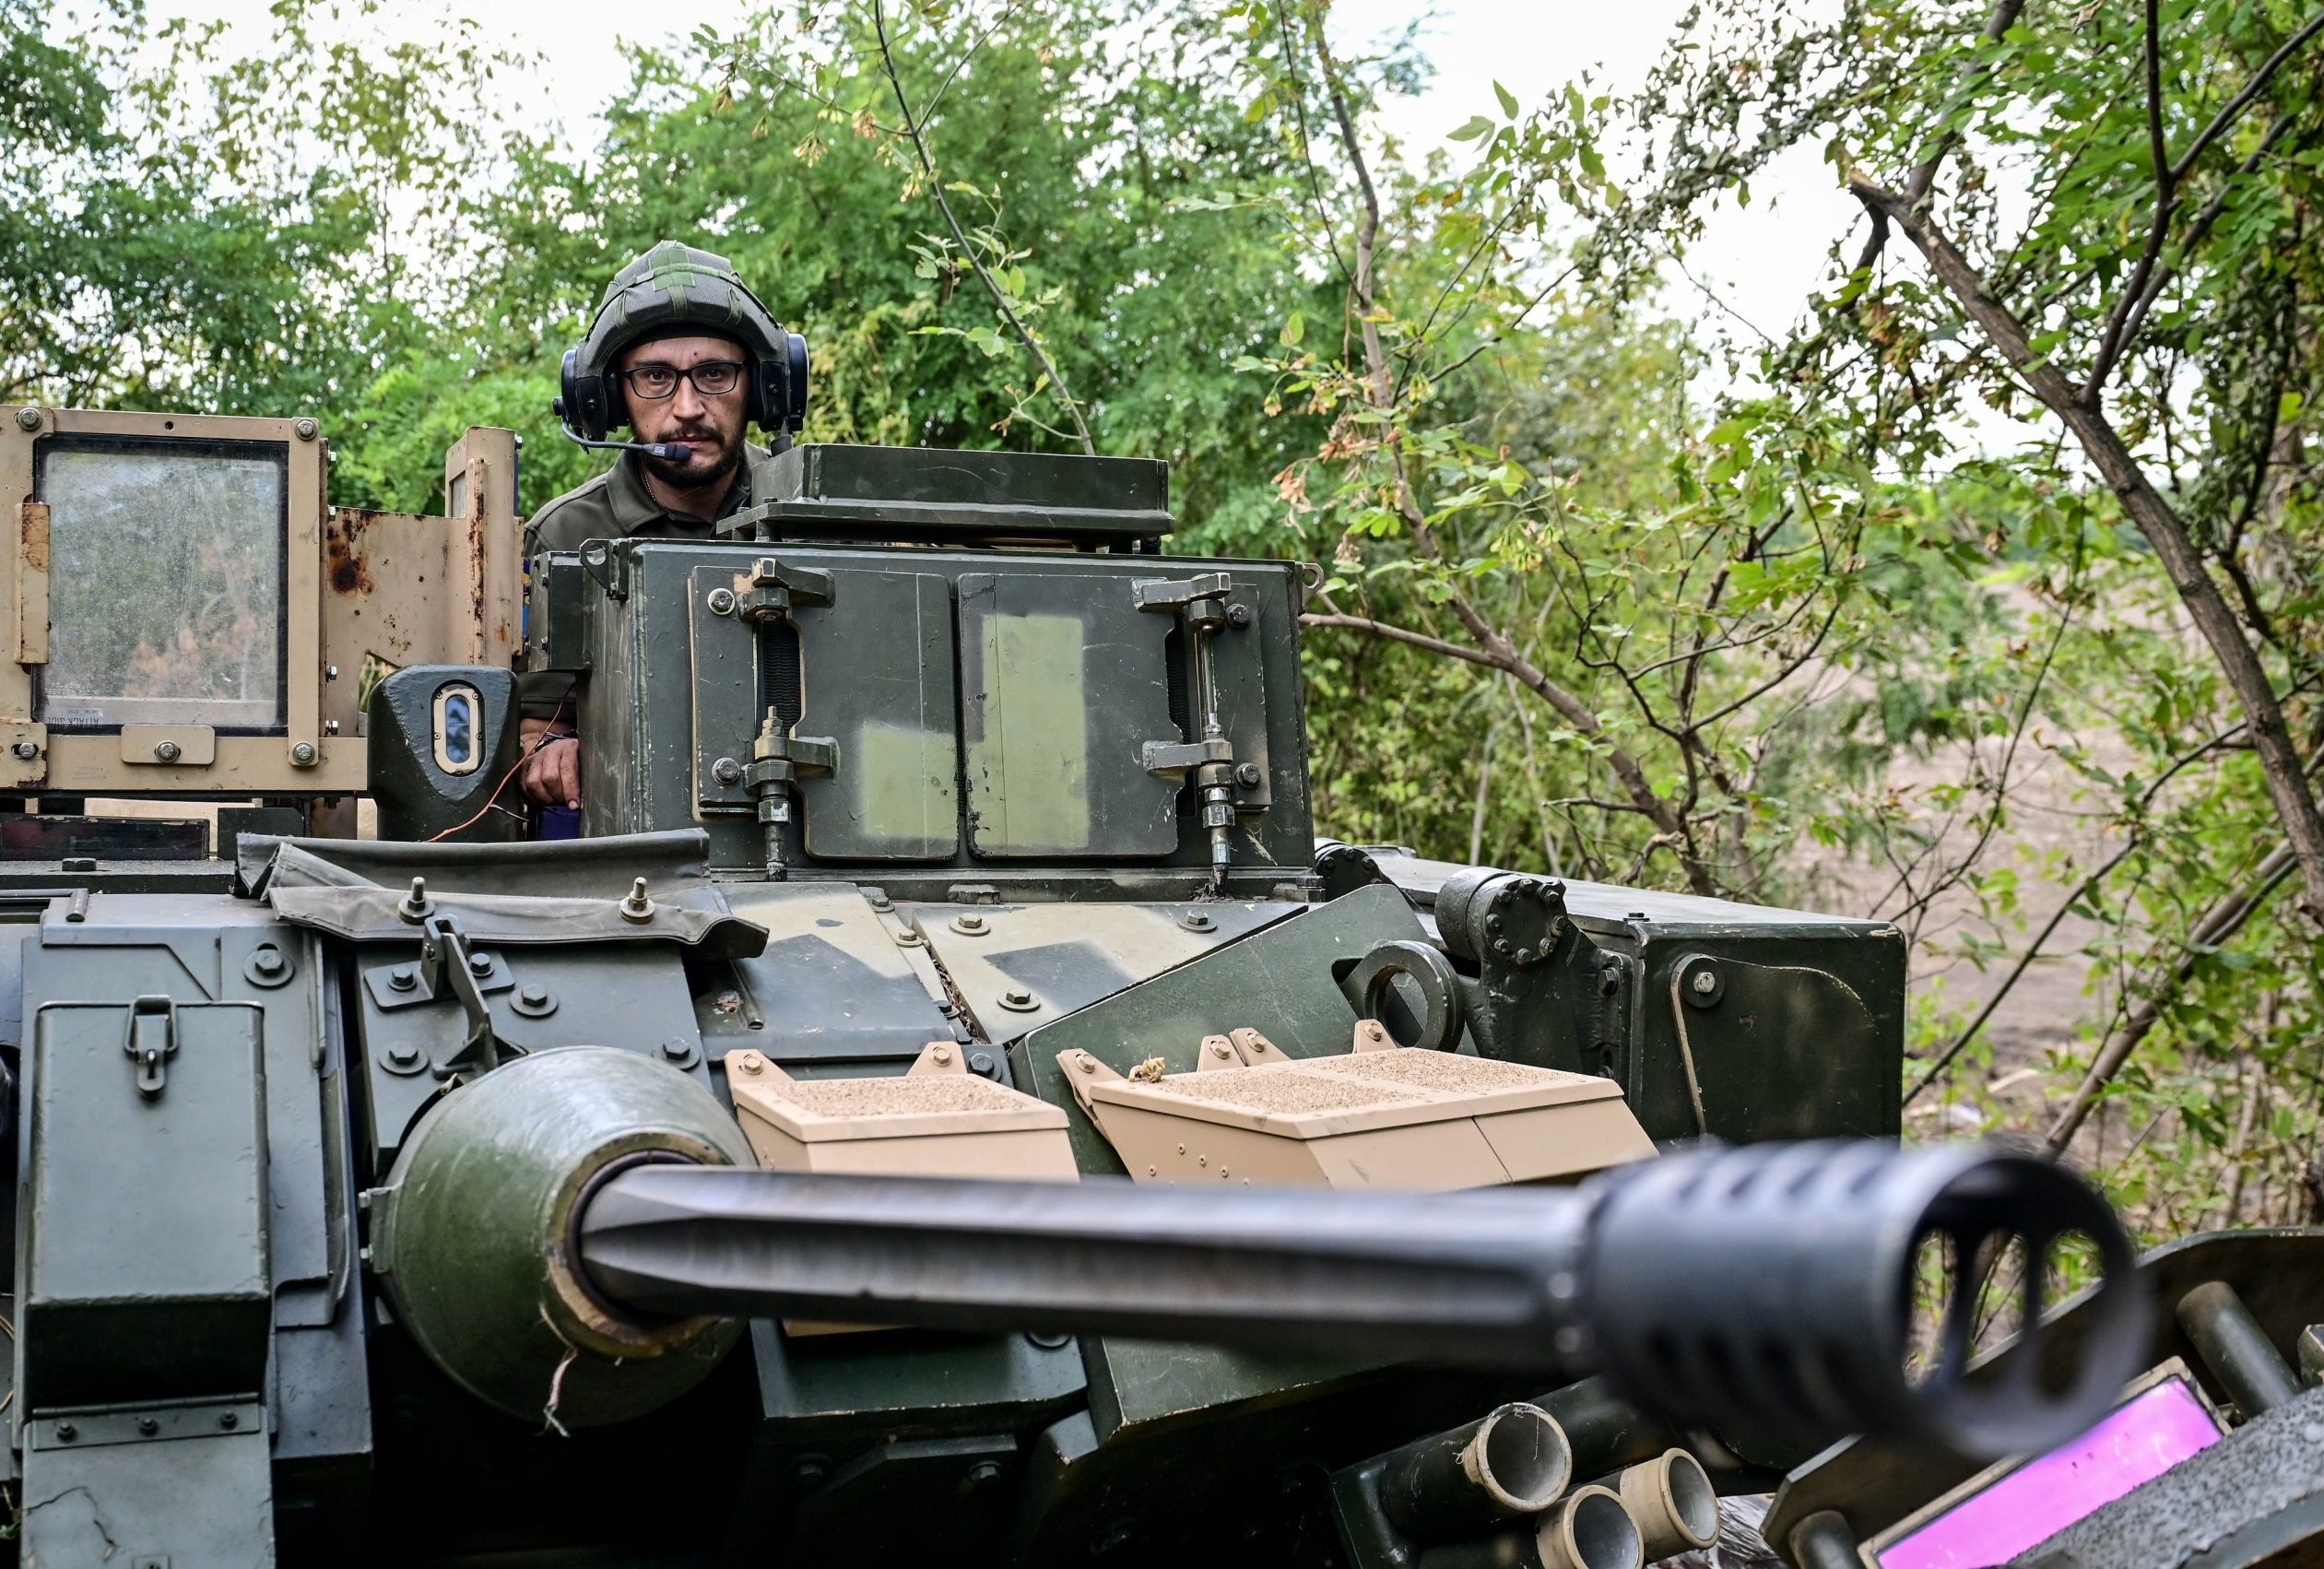 Lend-Lease Act expiration will not affect current US aid to Ukraine - Atlantic Council